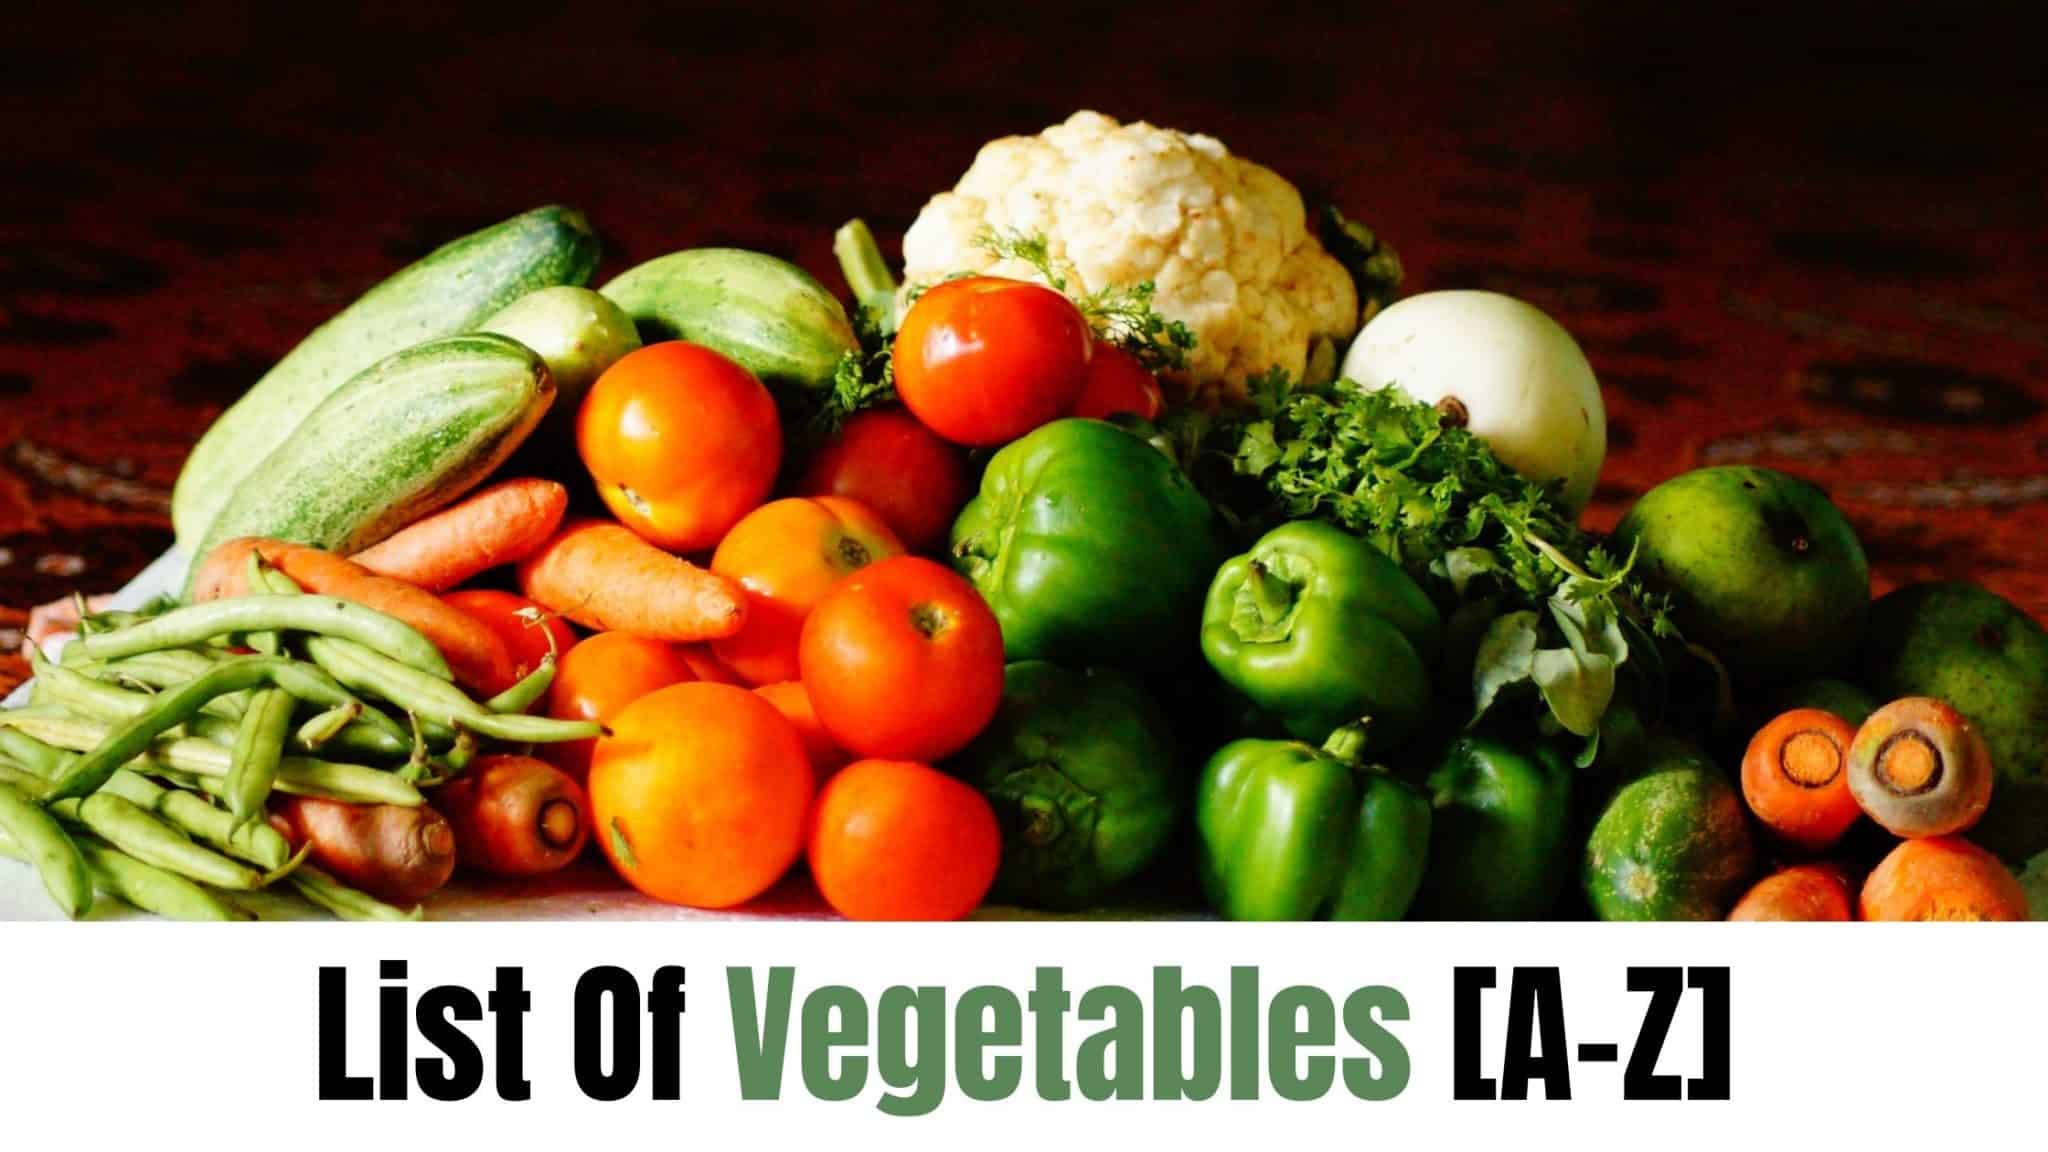 list-of-vegetables-a-z-with-scientific-names-pictures-naturefaq